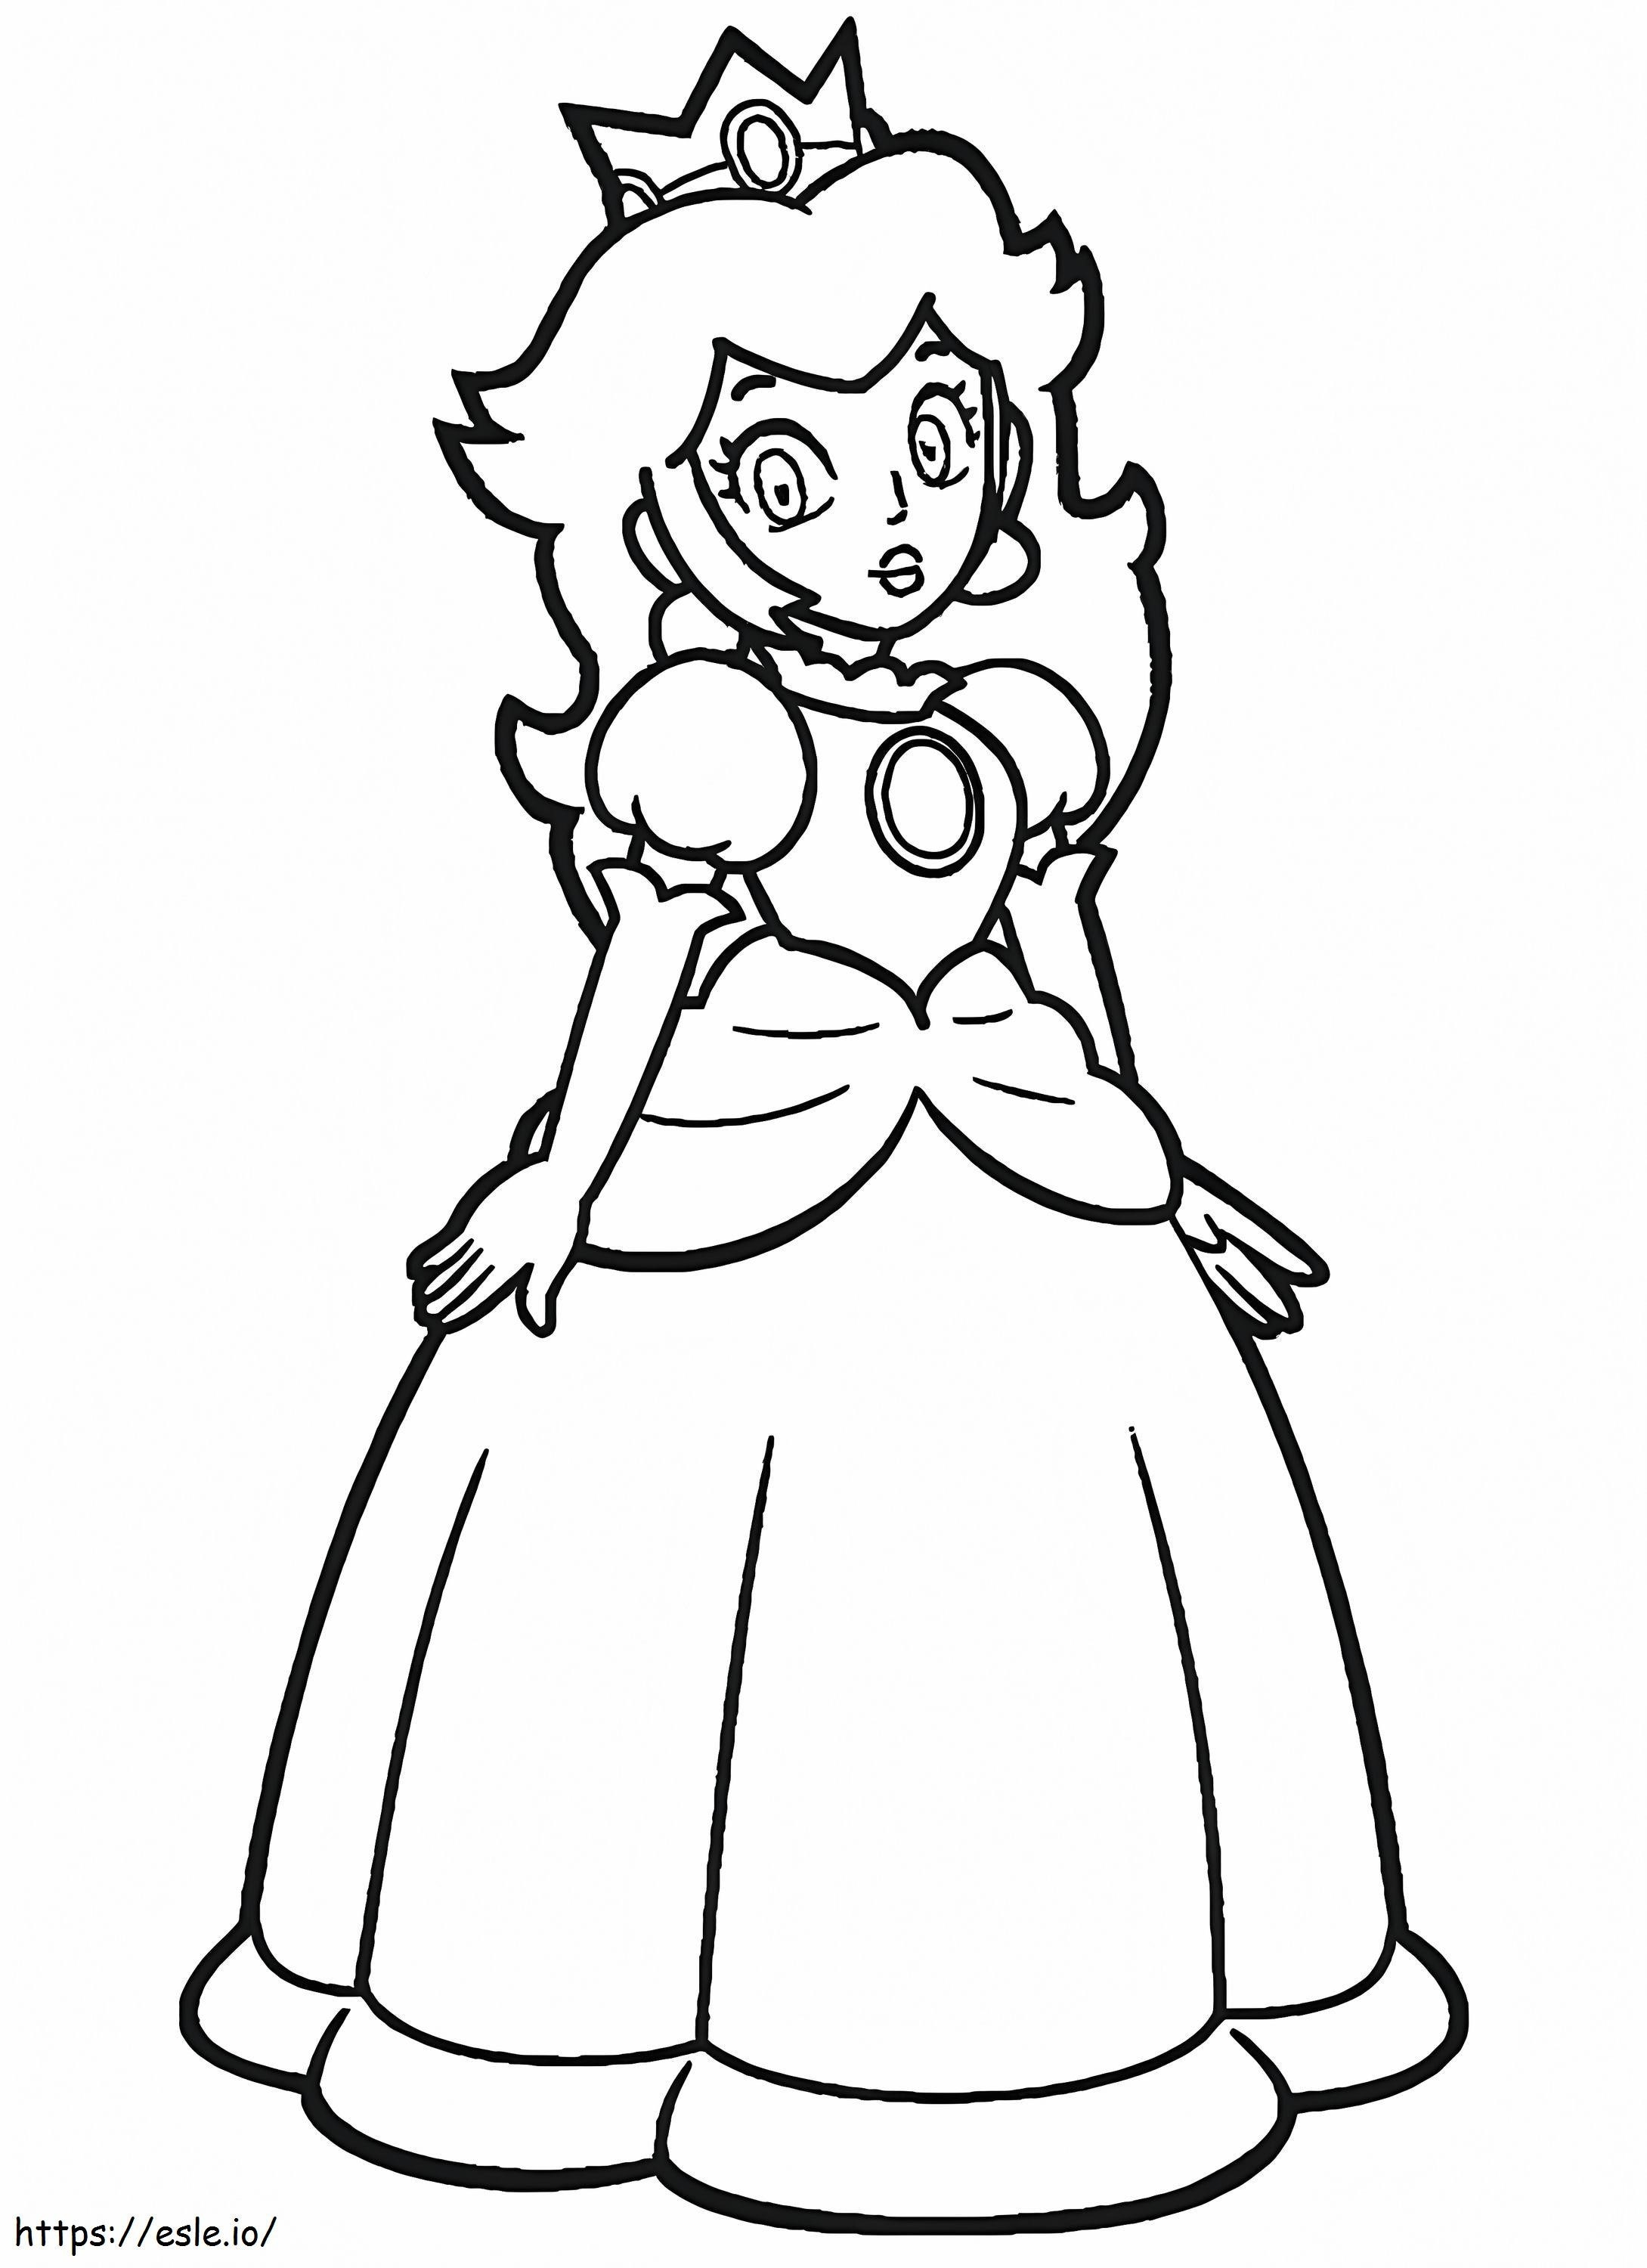 Peach From Super Mario coloring page